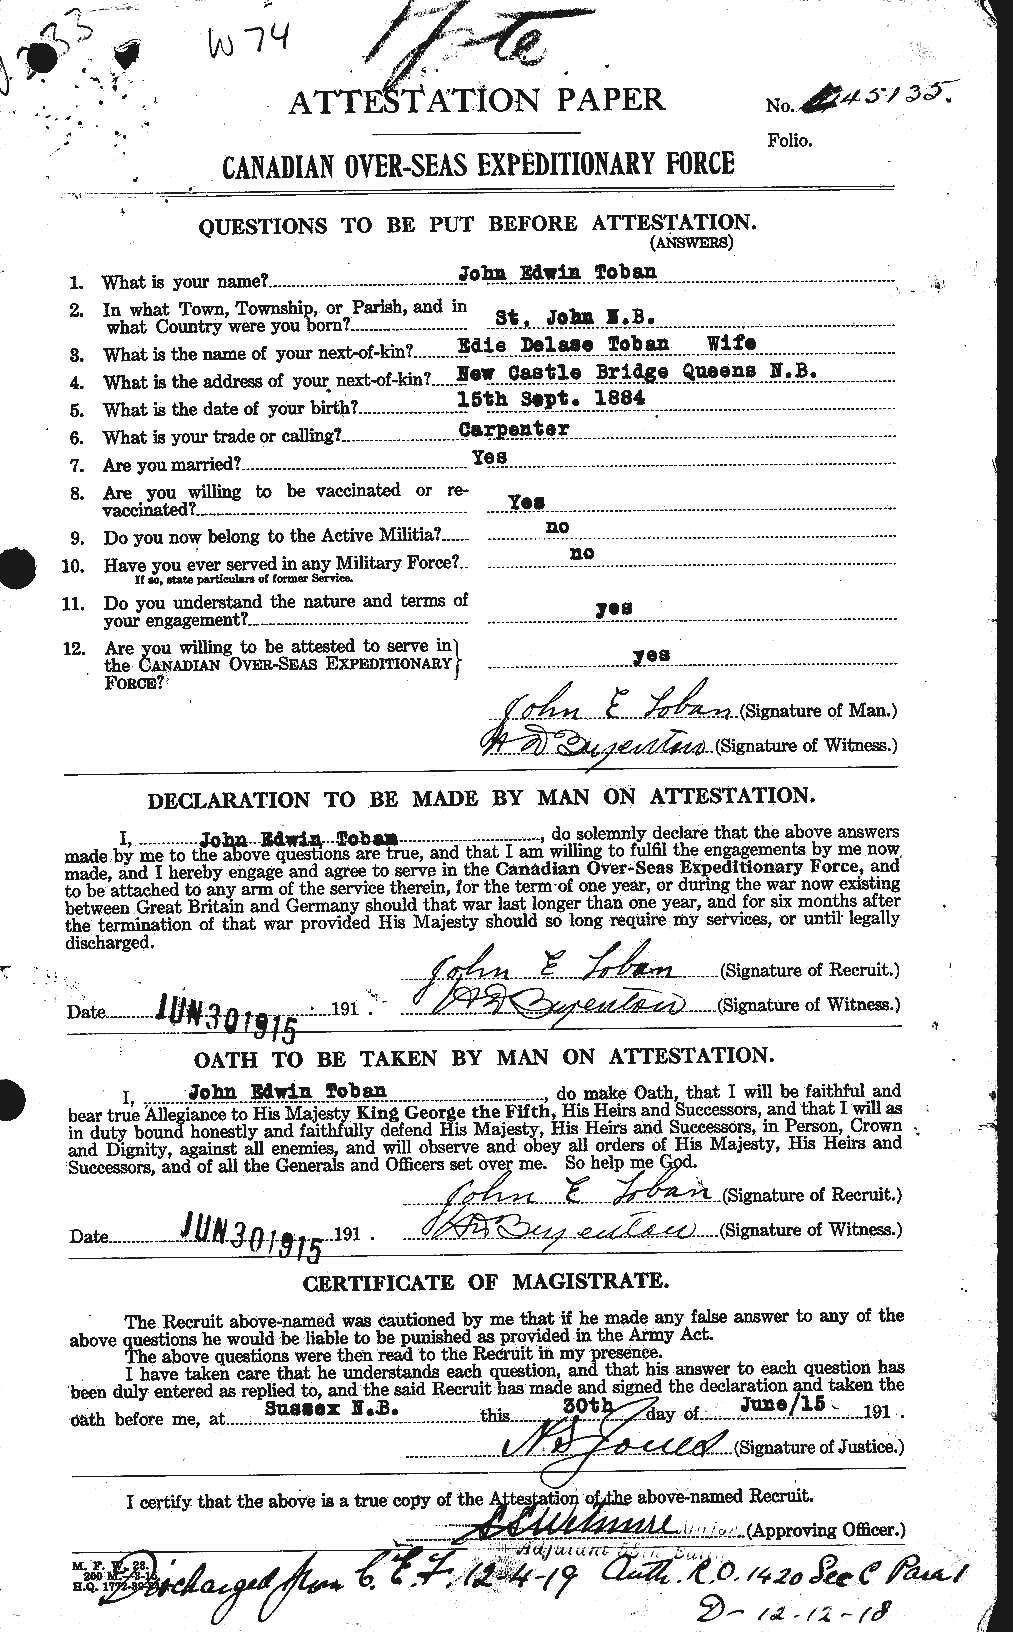 Personnel Records of the First World War - CEF 635027a